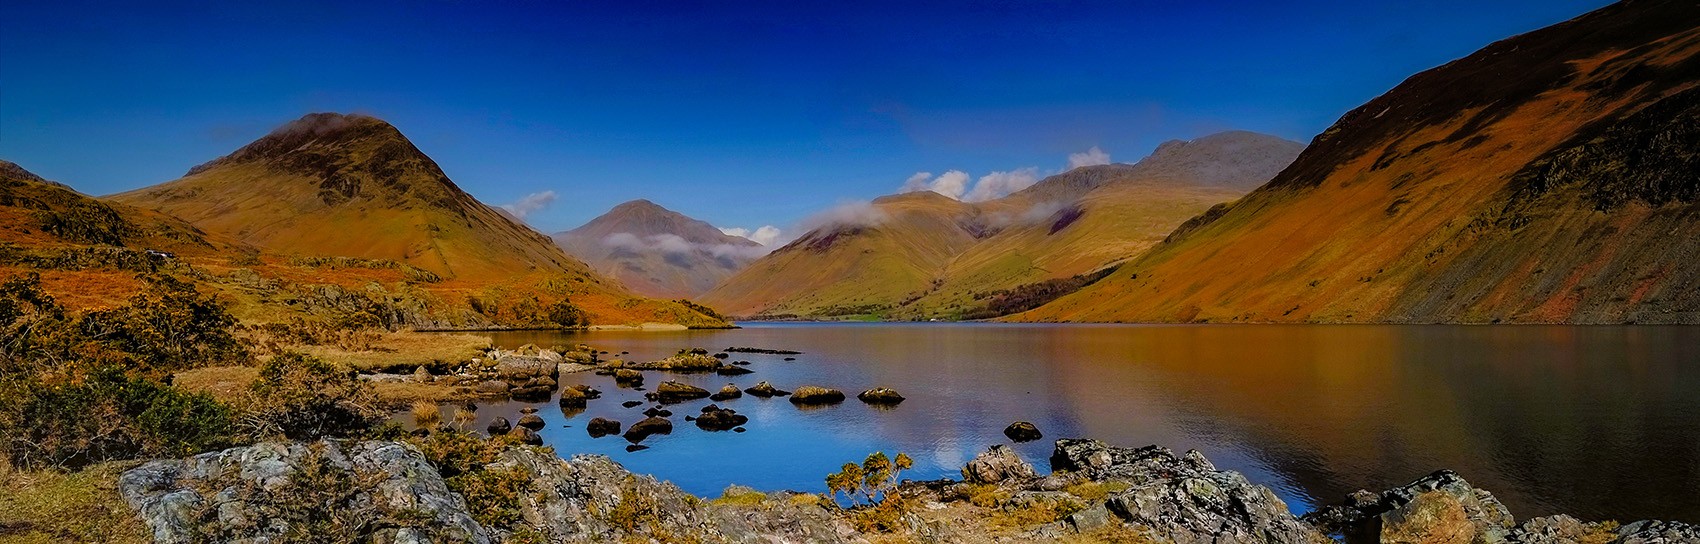 Wastwater looking towards Scafell Pike Lake District. Photograph by JEZ CAMPBELL